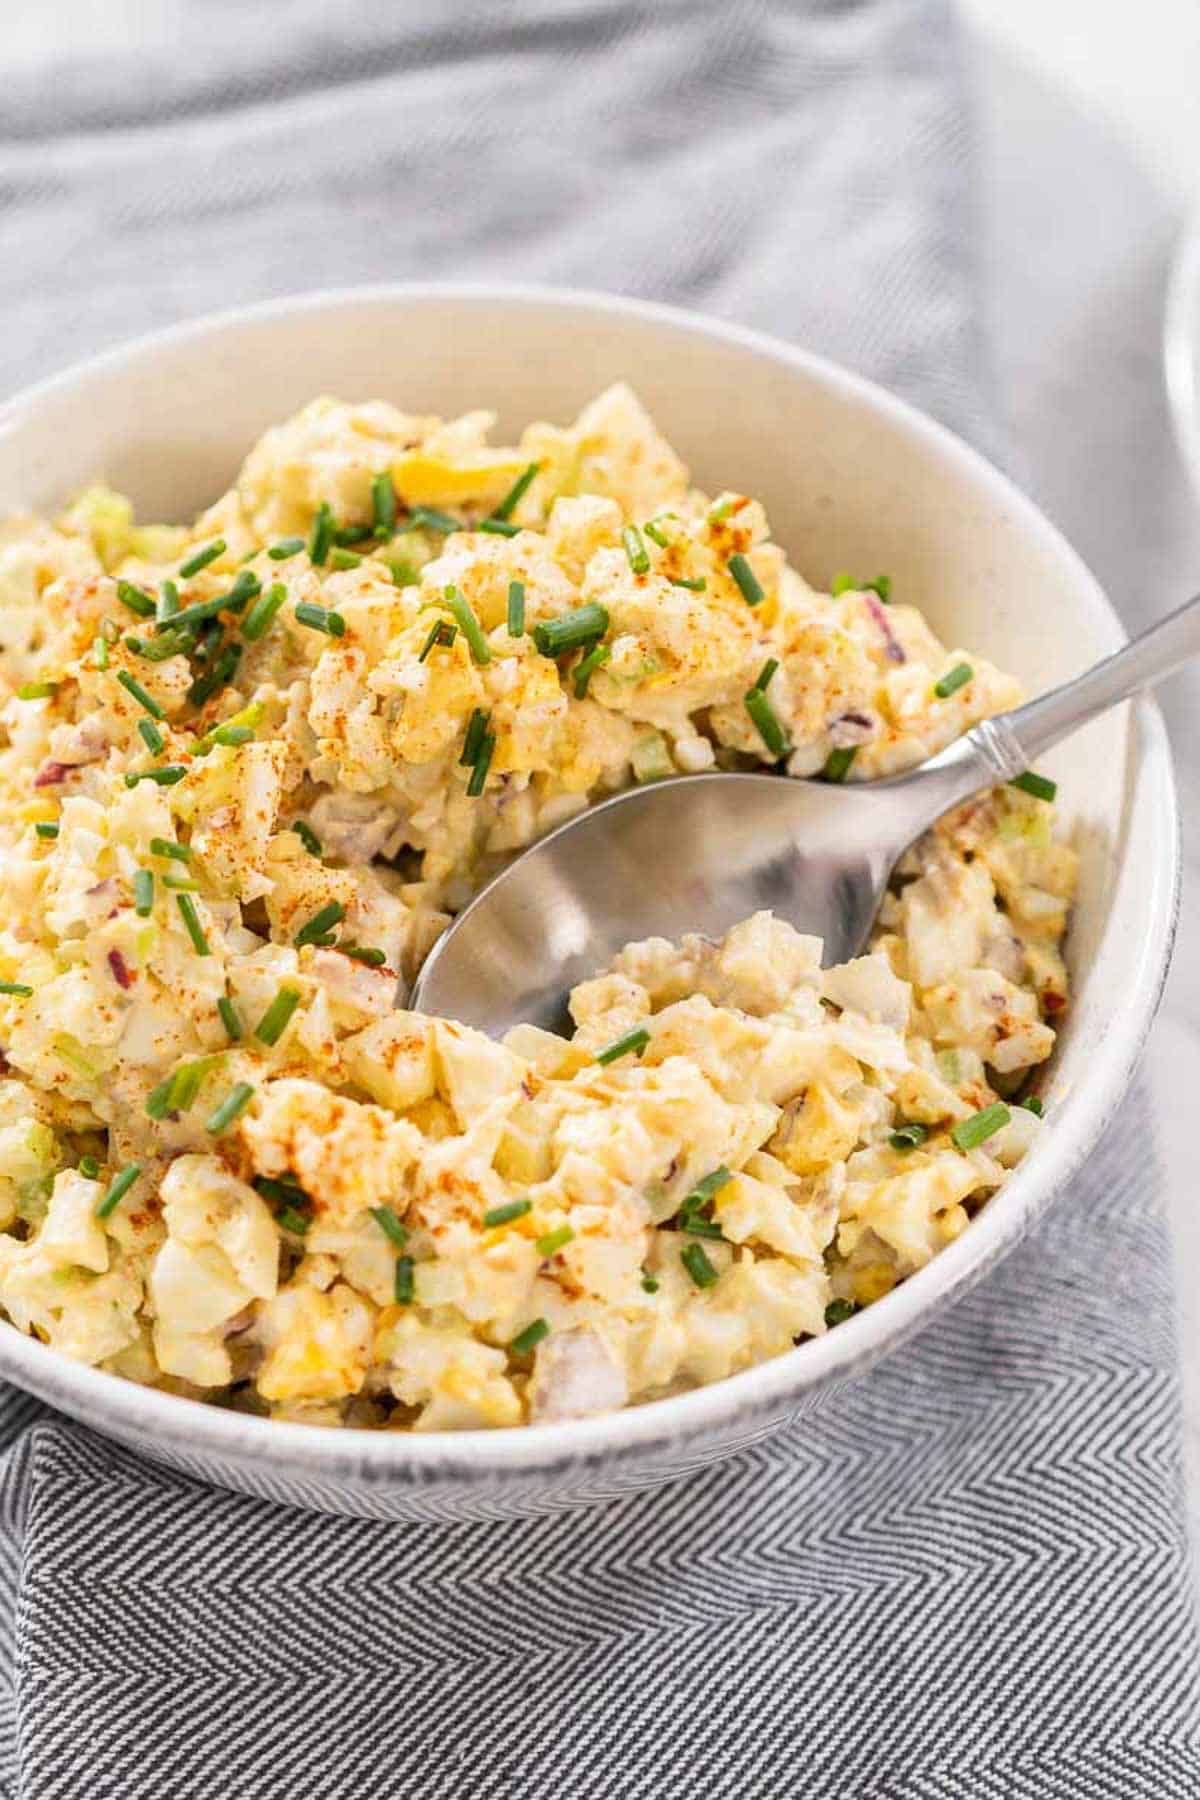 Instant Pot Egg Salad in a bowl with a metal spoon taking out a scoop in a white bowl.